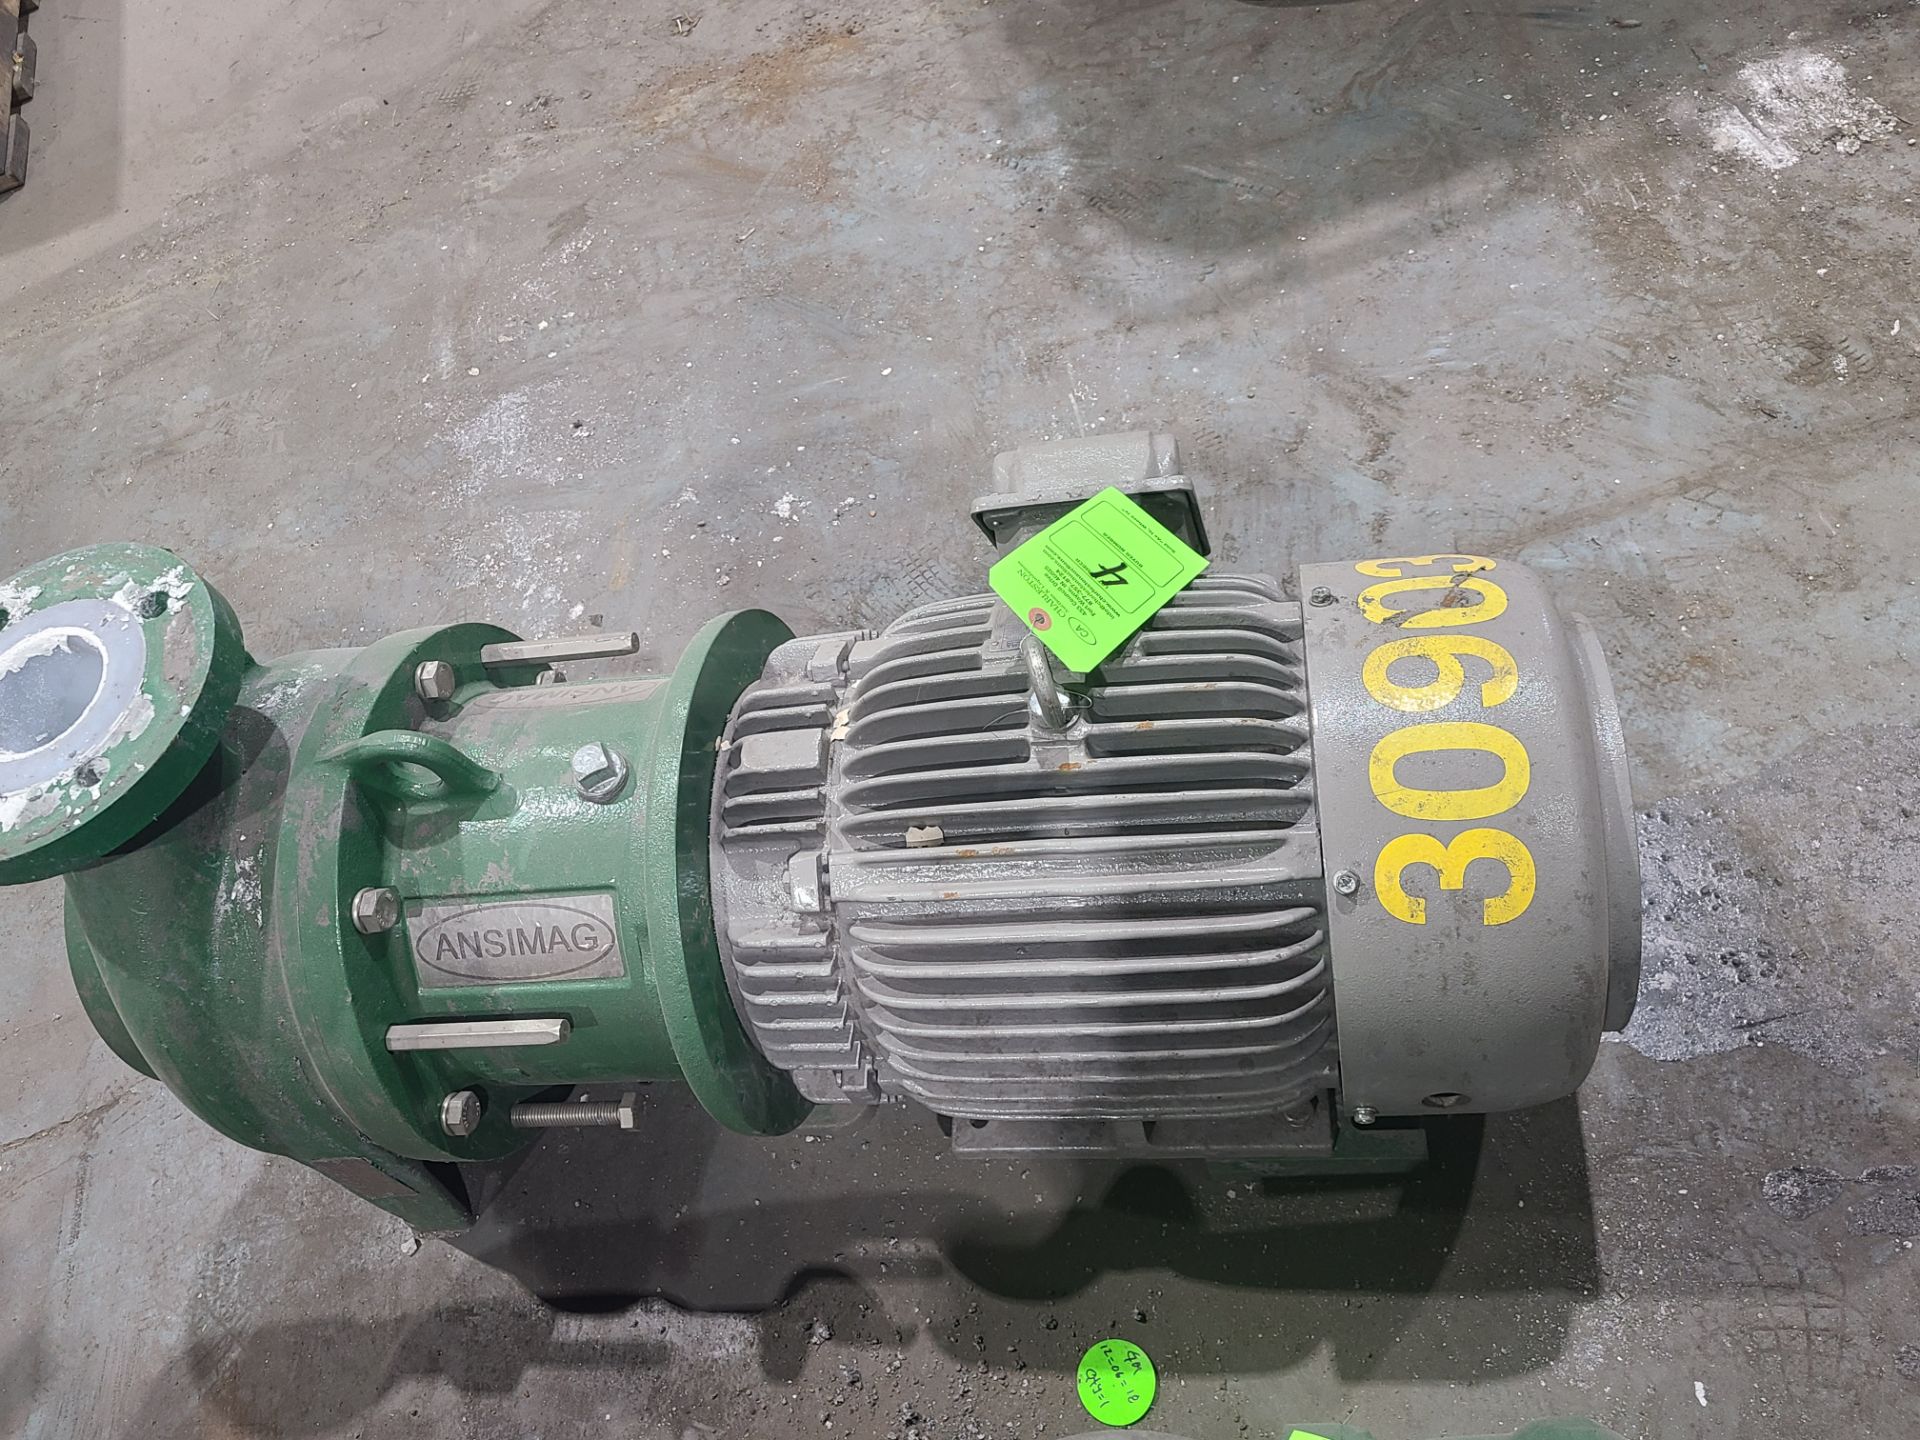 ANSIMAG PUMP CODE KF438CO5KL12111 - 7.50; MFD - 220CT14; MAWP - 285PSI WITH TECO WESTINGHOUSE 15 - Image 2 of 5